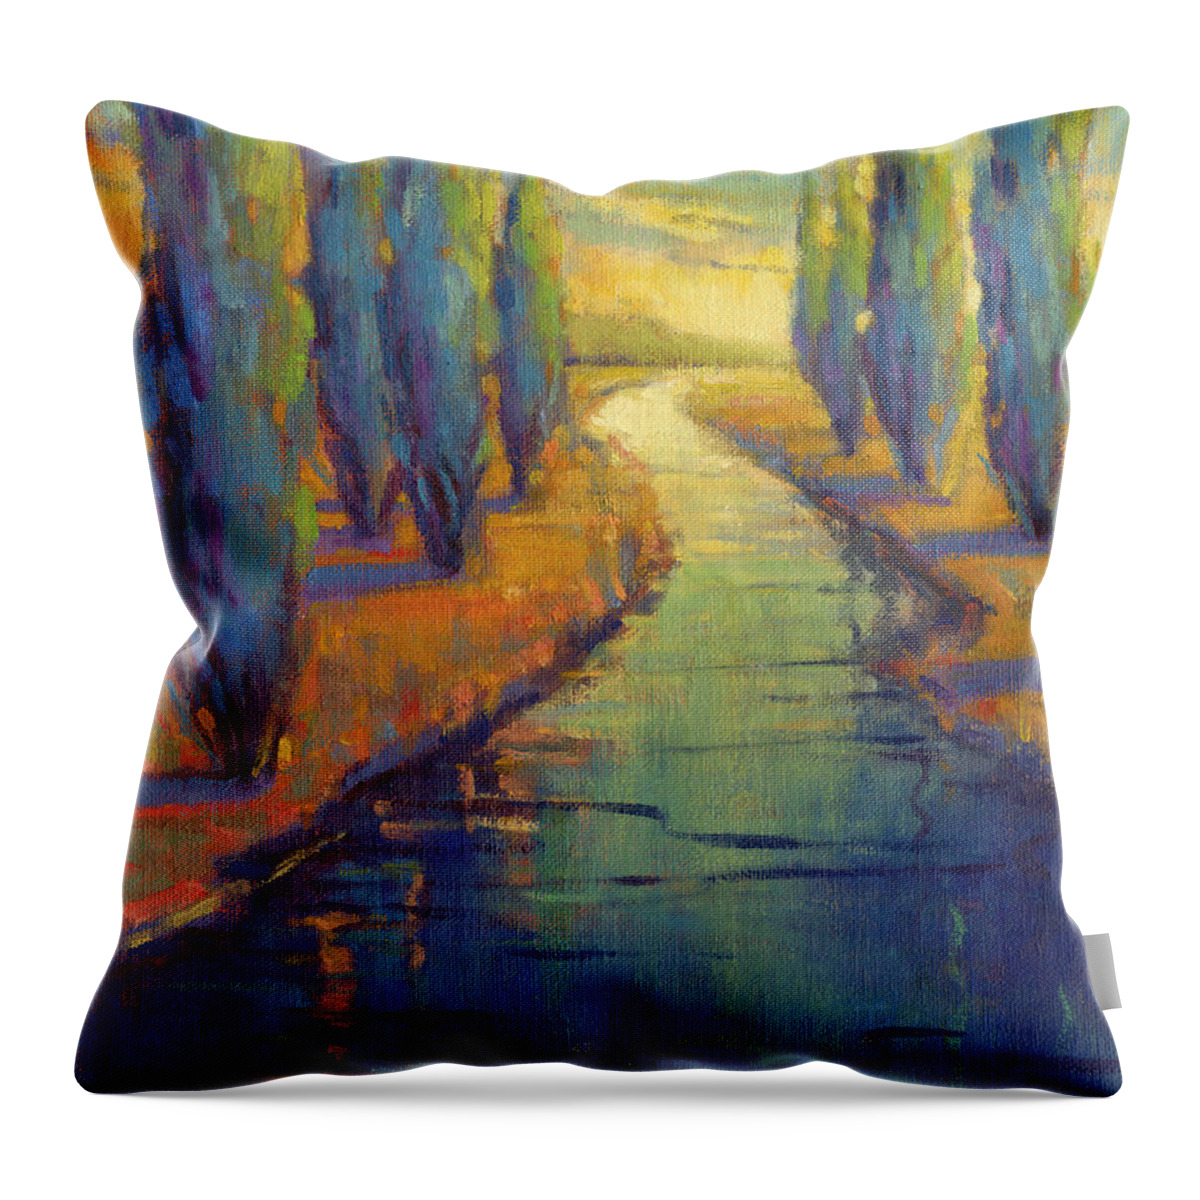 Cypress Throw Pillow featuring the painting Cypress Reflection by Konnie Kim